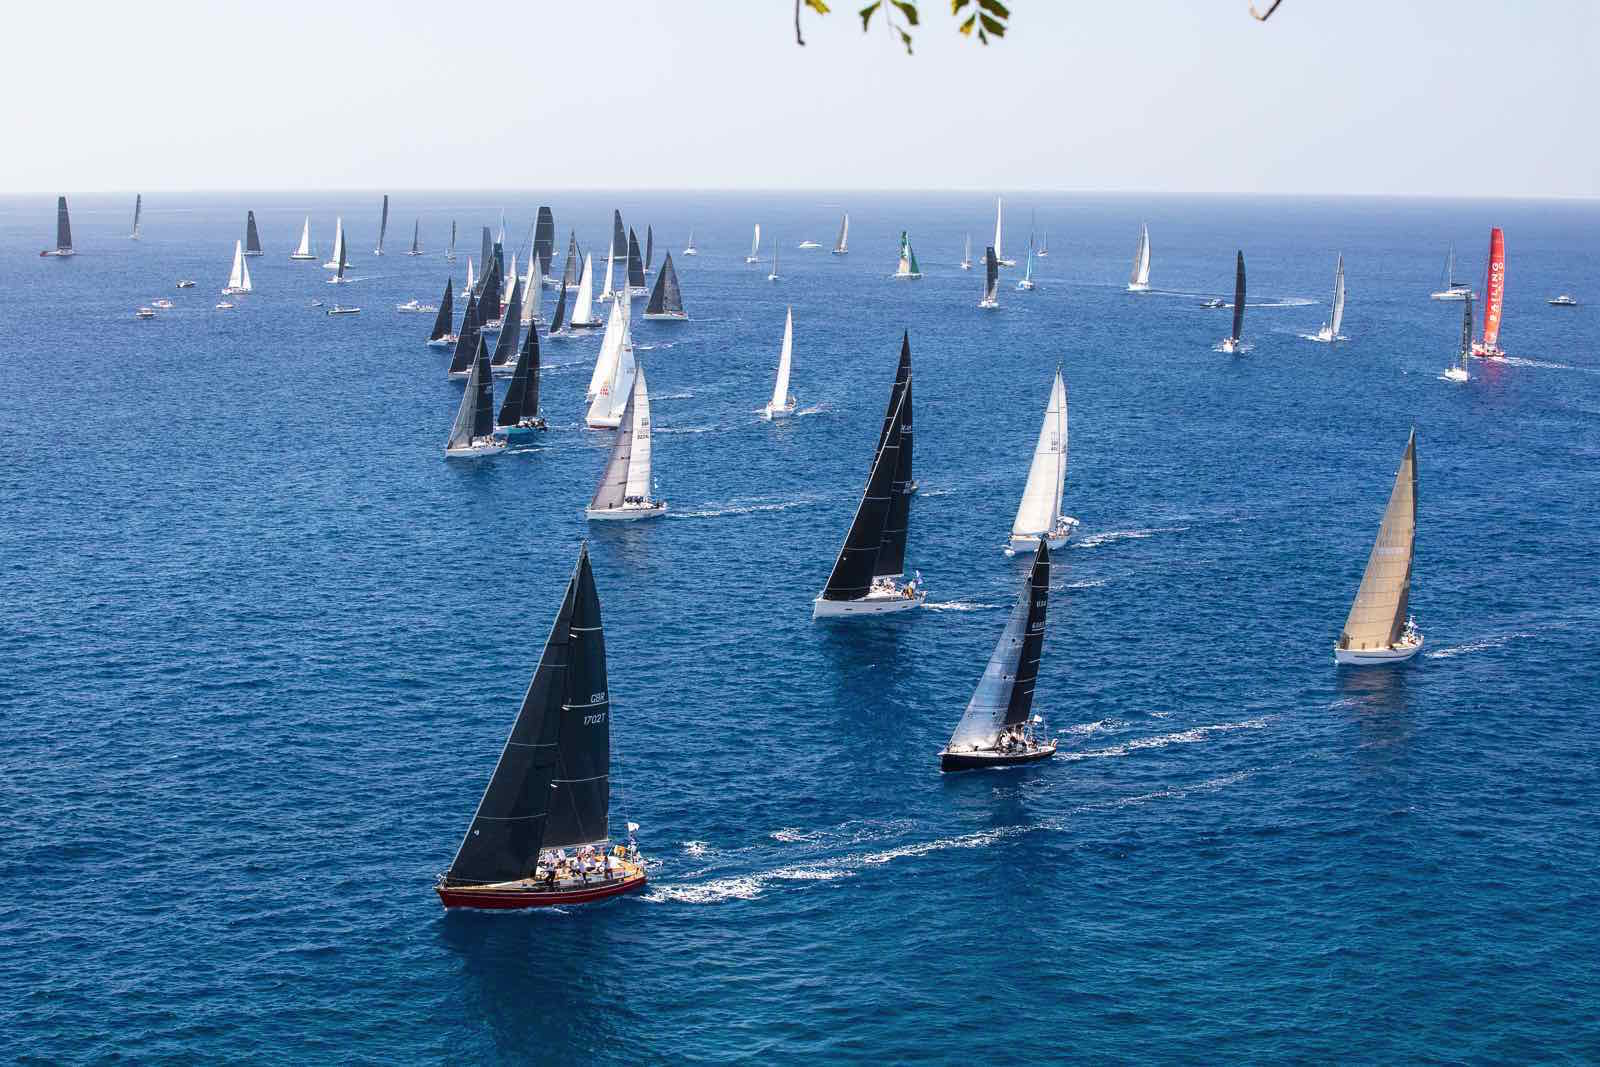 Scarlet Oyster leads the IRC Two fleet at the start of the RORC Caribbean 600 © RORC/Arthur Daniel